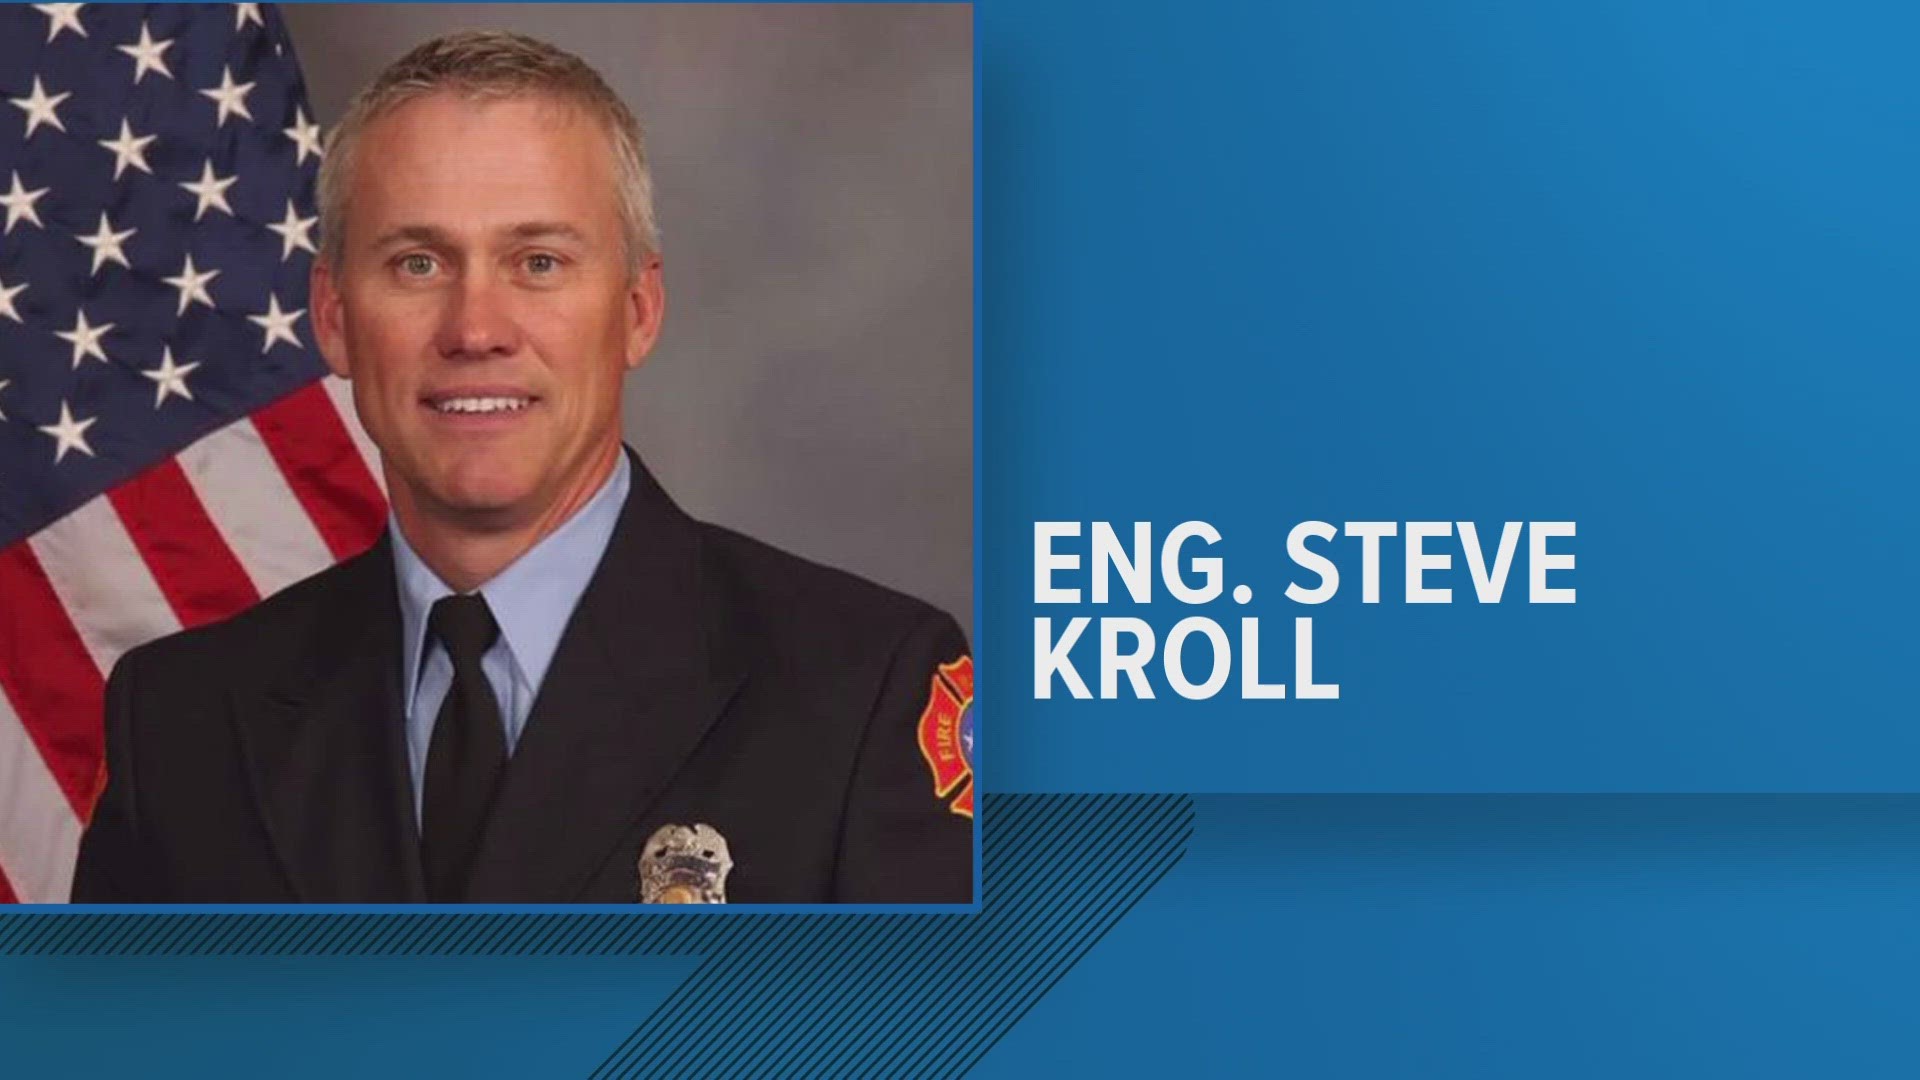 The Department said Engineer Steve Kroll had been battling cancer for well over a year.